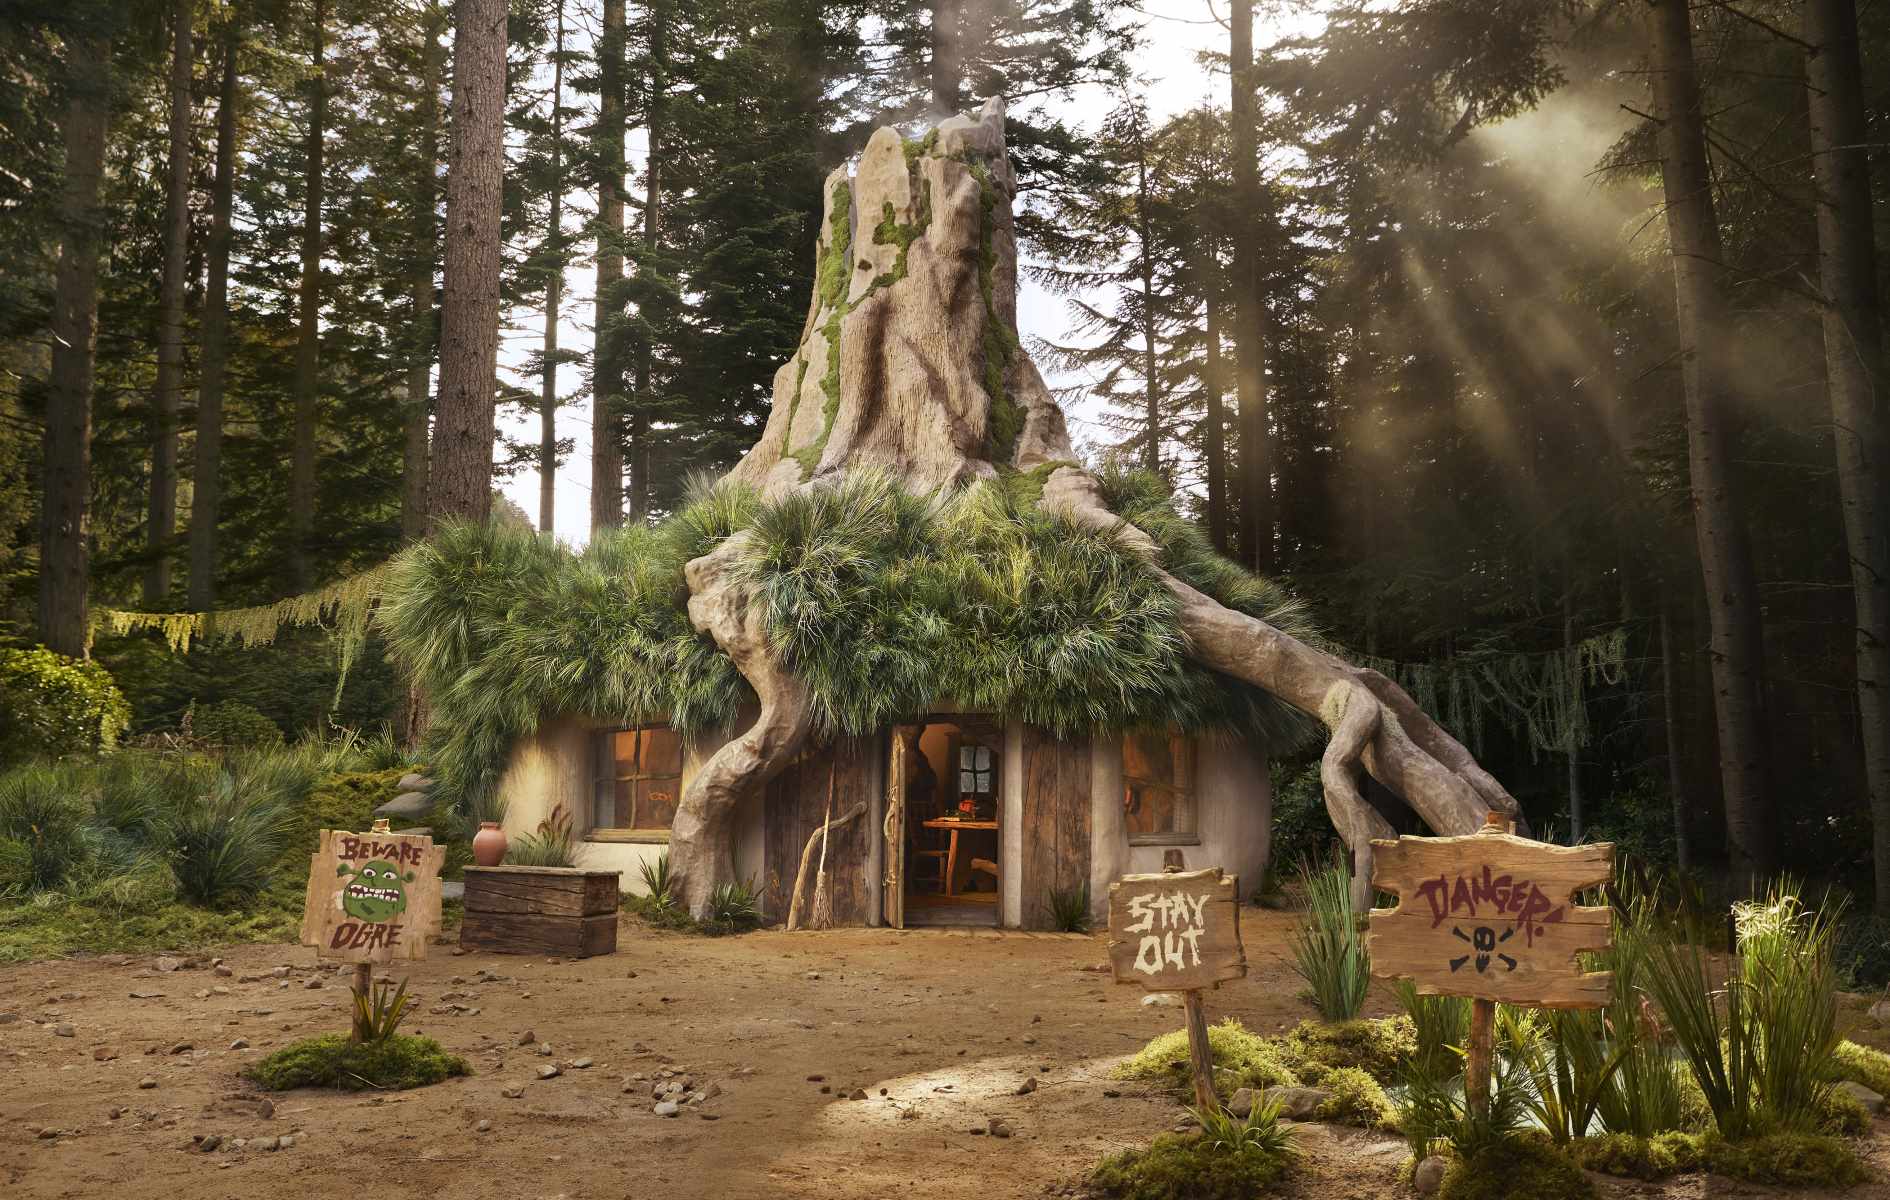 Live Like An Ogre: Shrek’s Swamp Available On Airbnb For 2 Nights